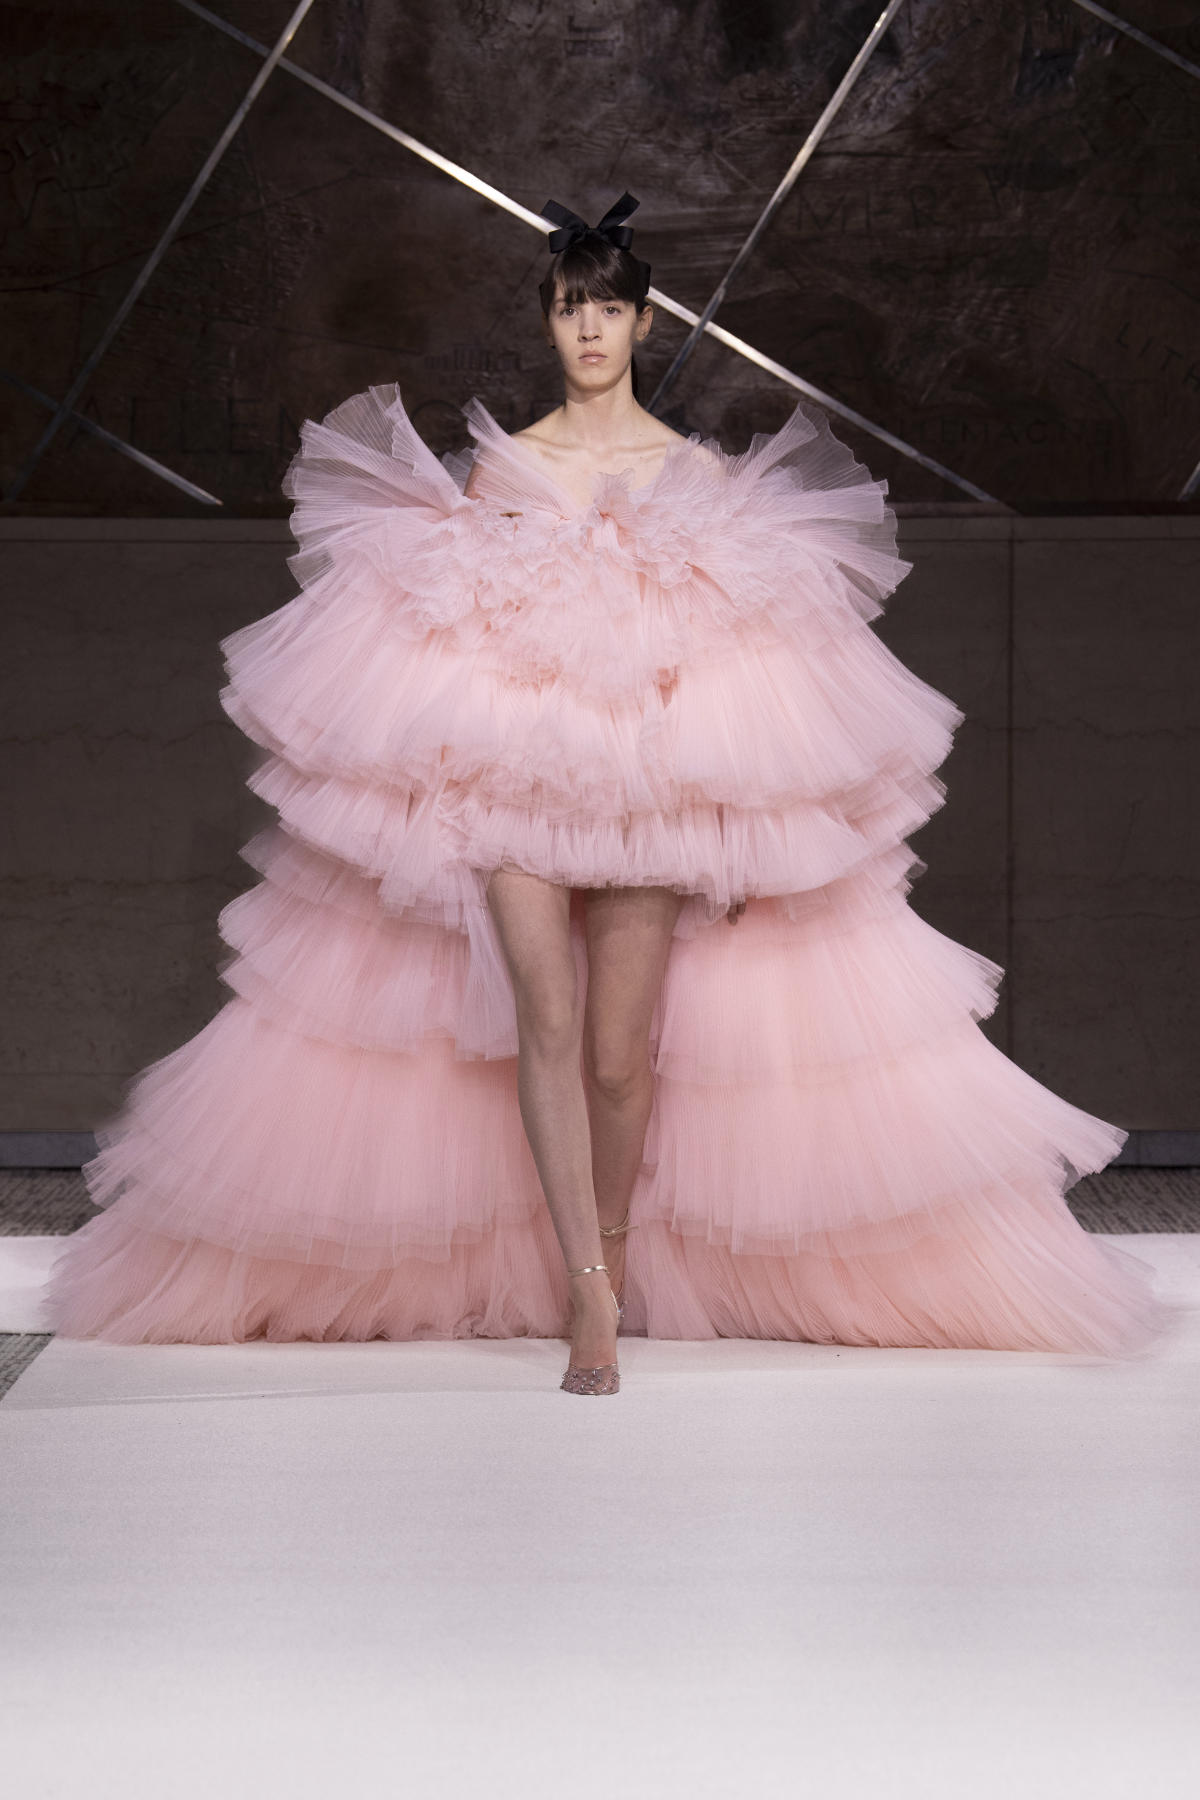 Giambattista Valli Presents His Pre-Fall And Haute Couture 2022 Collections: The Valli Experience